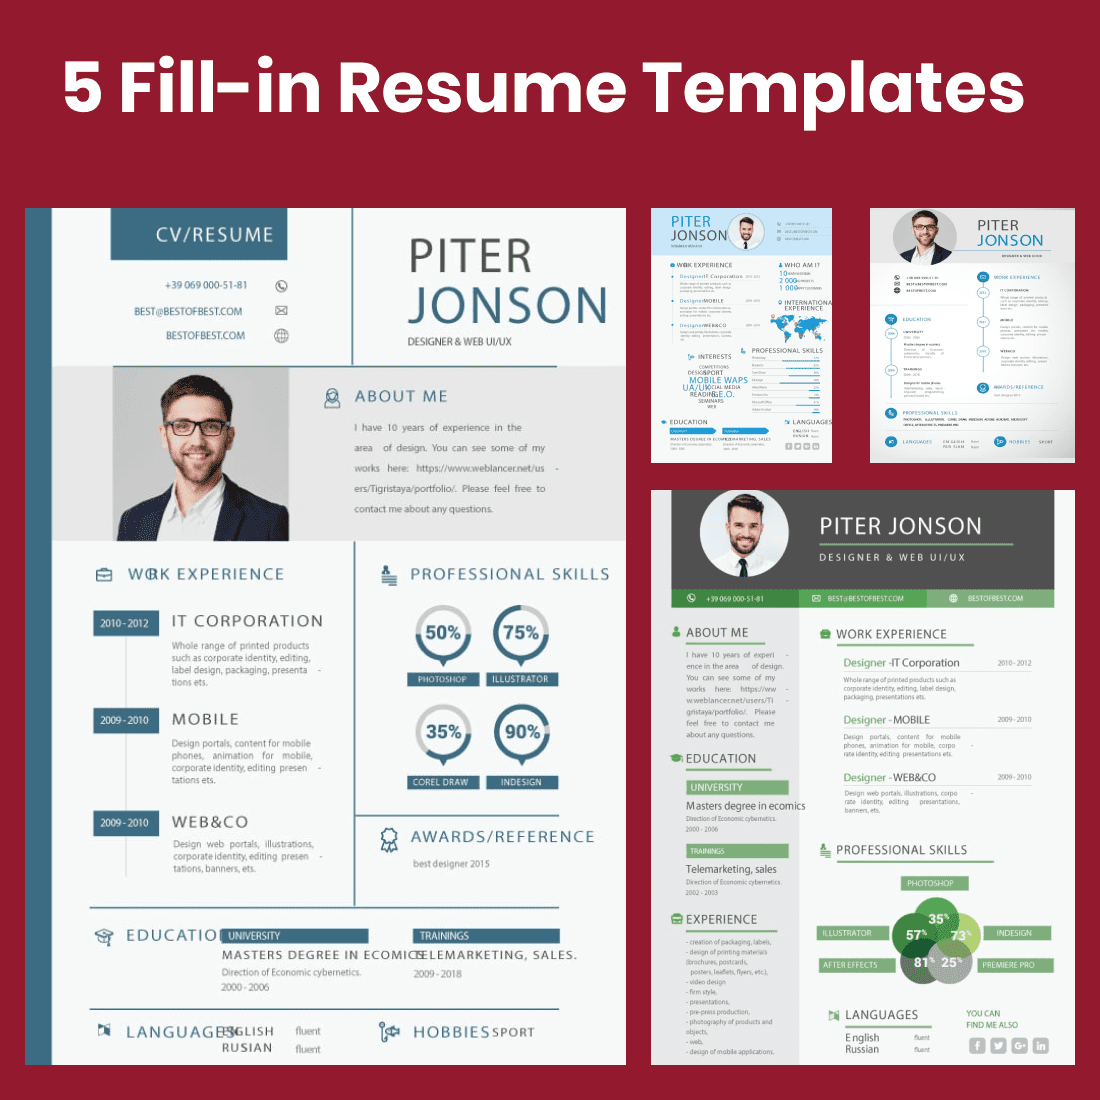 Set of five resume templates with a red background.